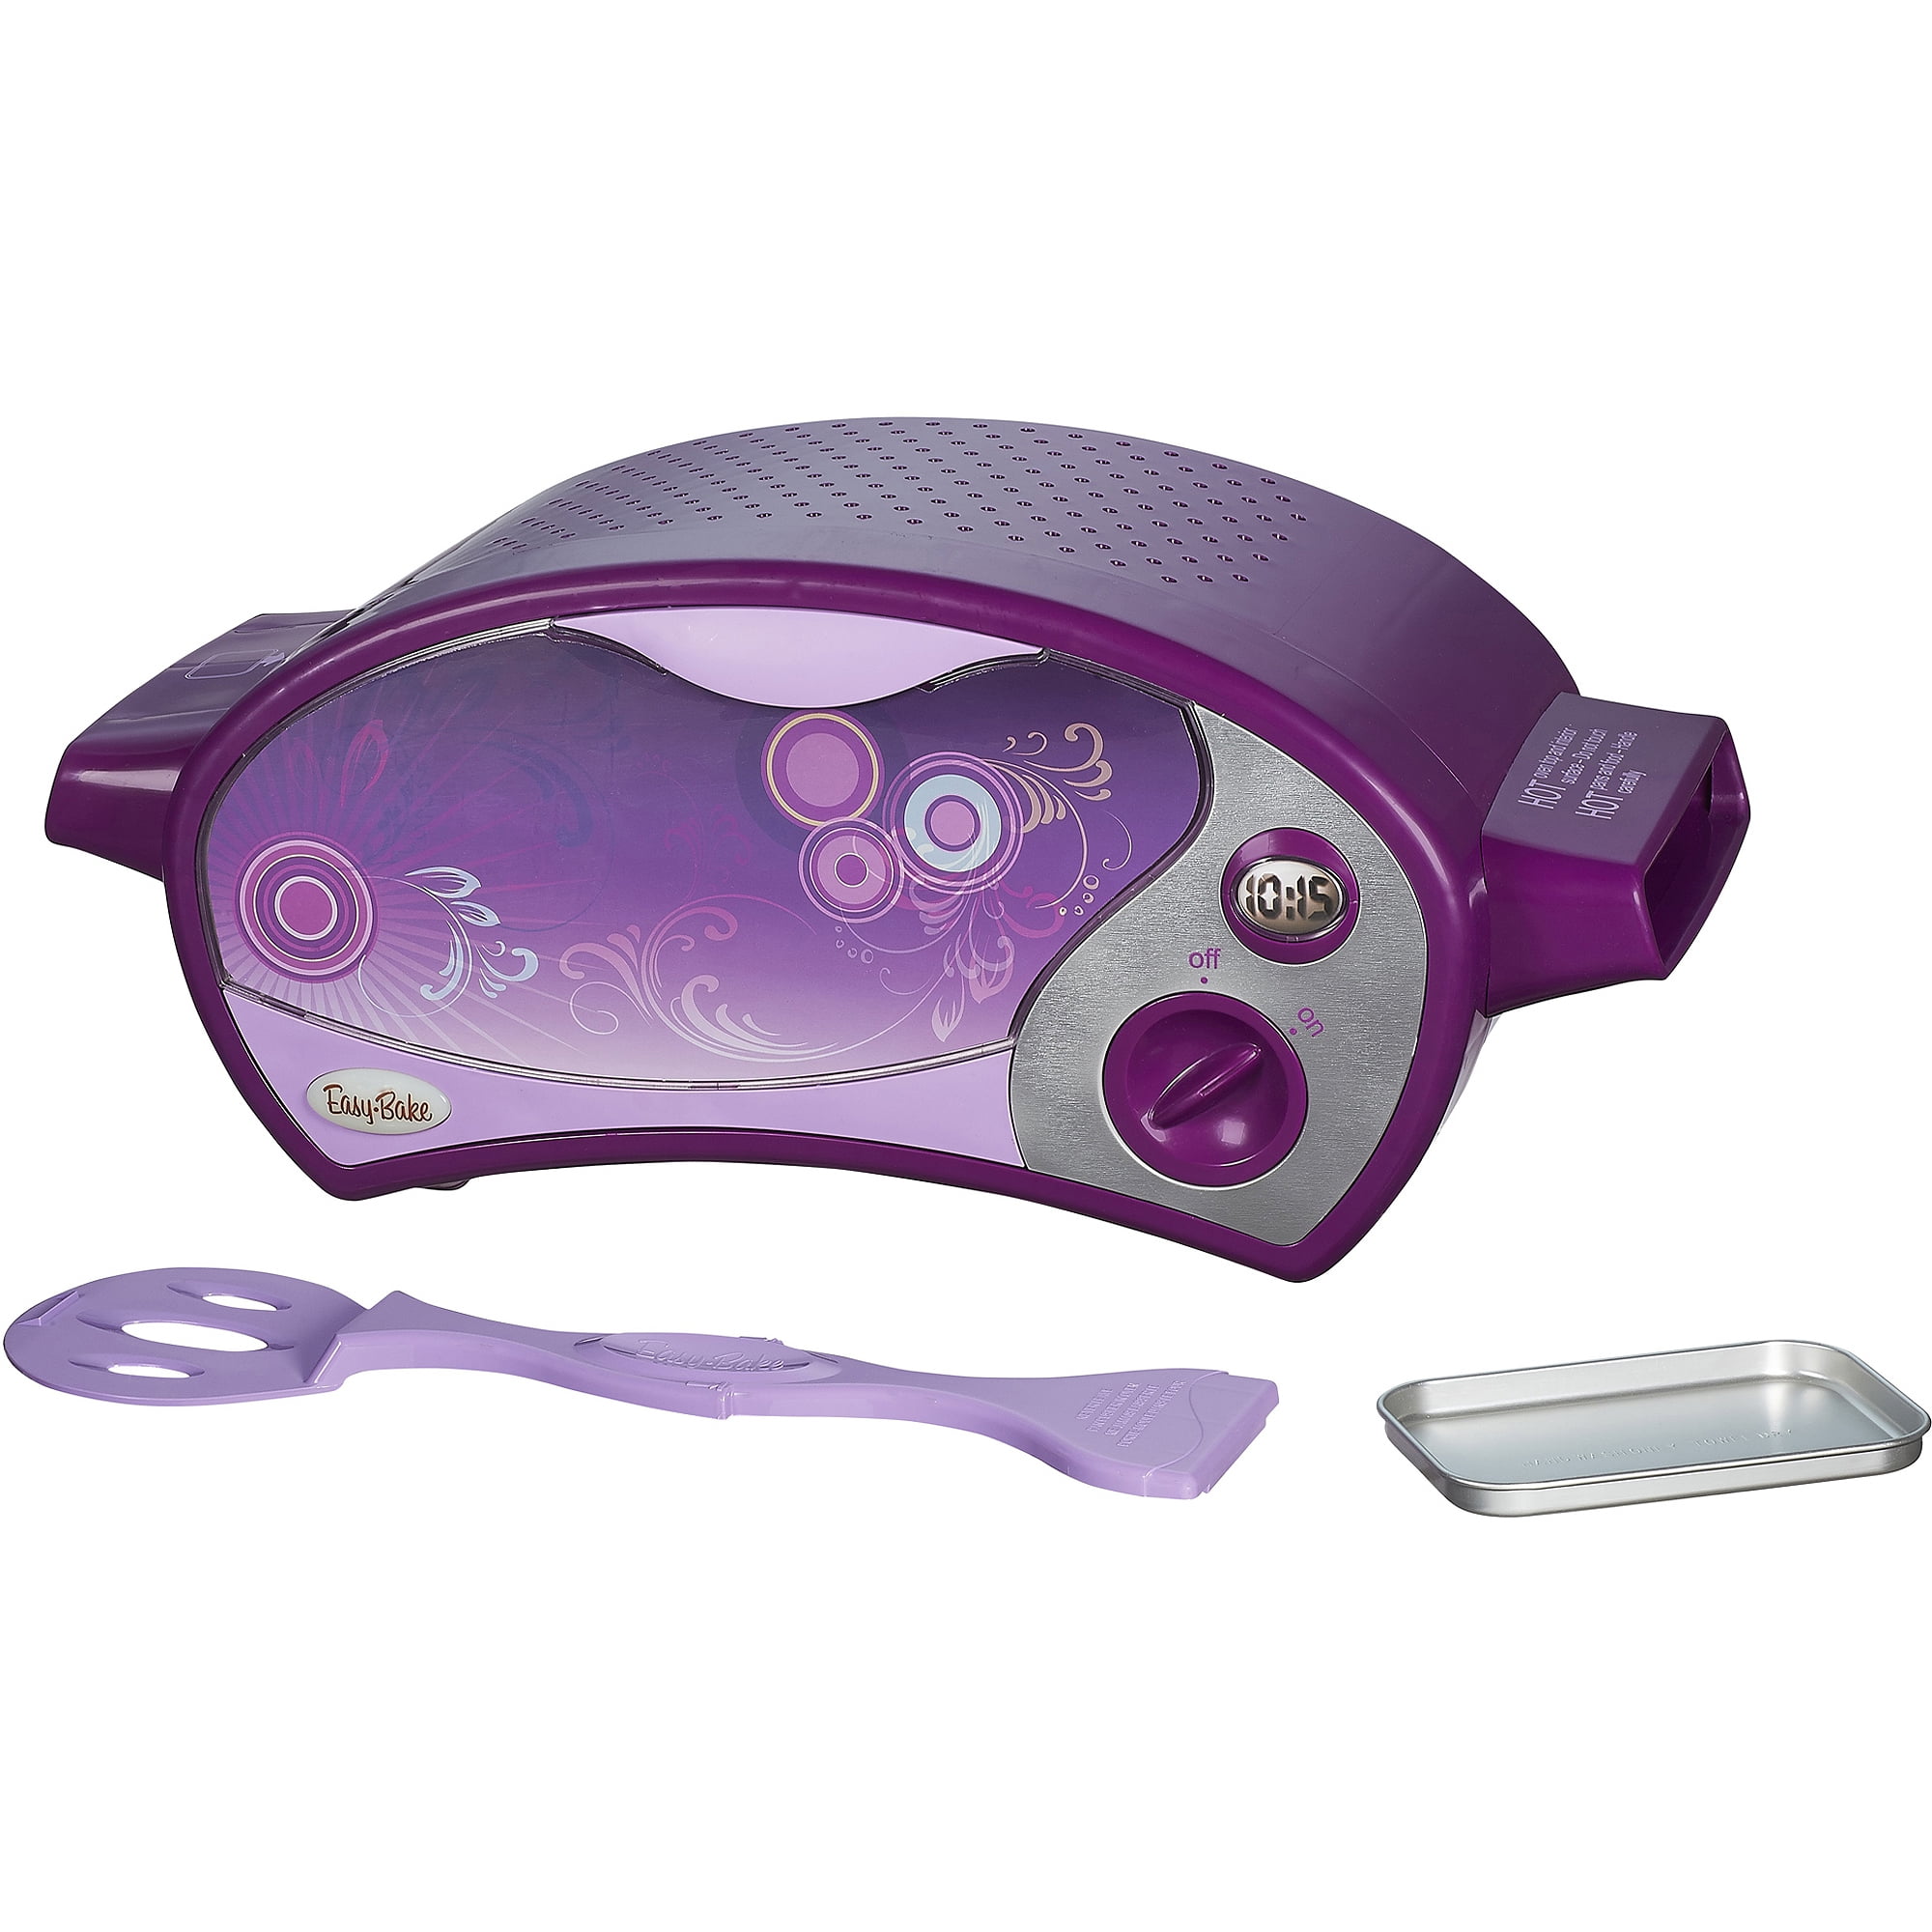 Easy Bake Ultimate Oven Purple Model A8585 for sale online 